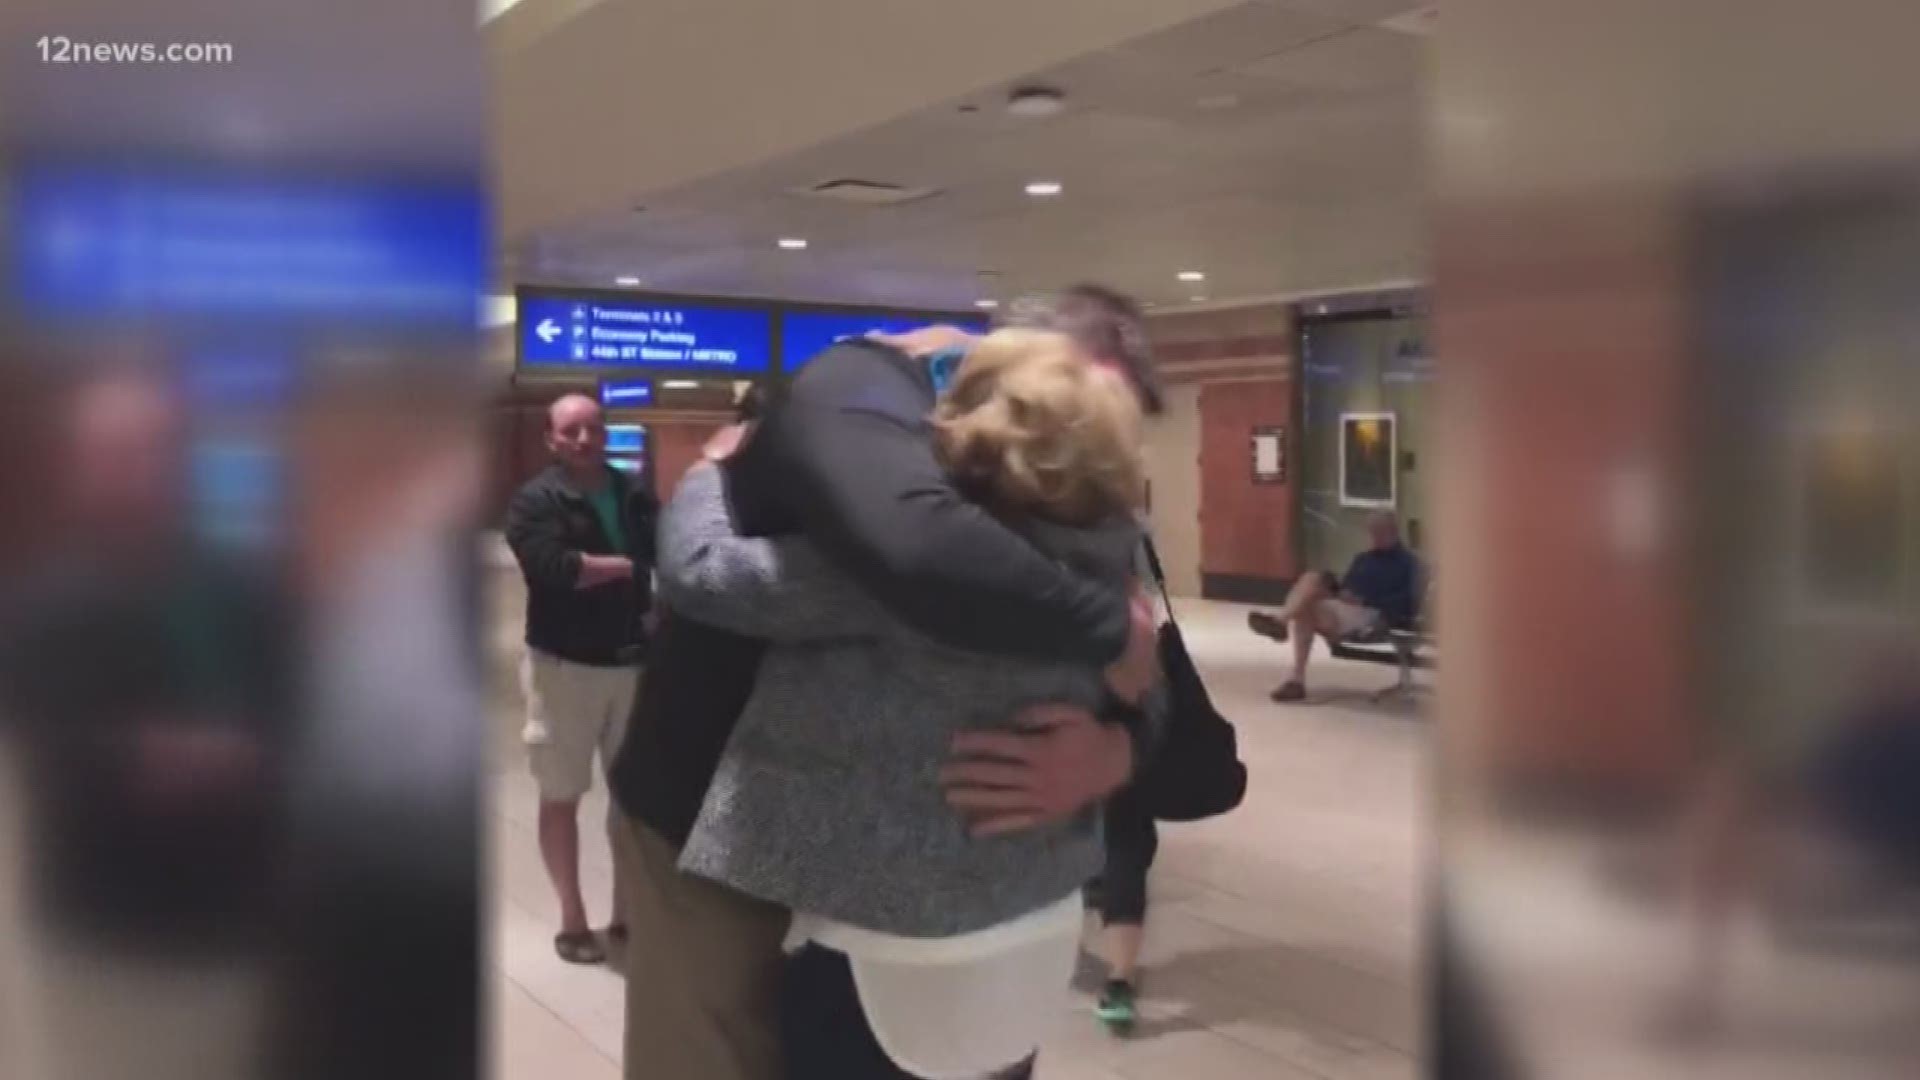 Jim Dwyer found his biological mother more than four decades after being put up for adoption.